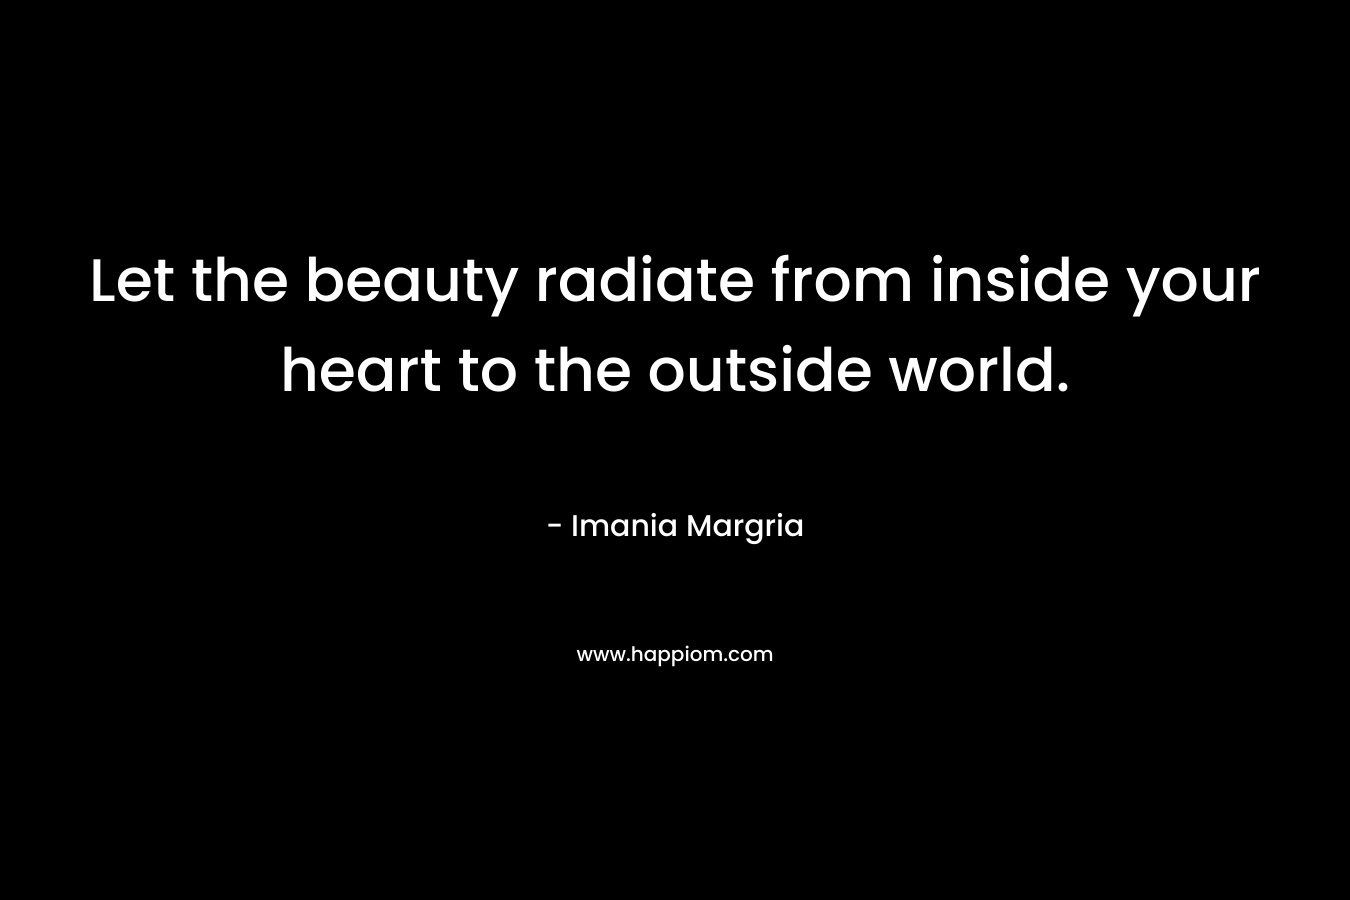 Let the beauty radiate from inside your heart to the outside world.